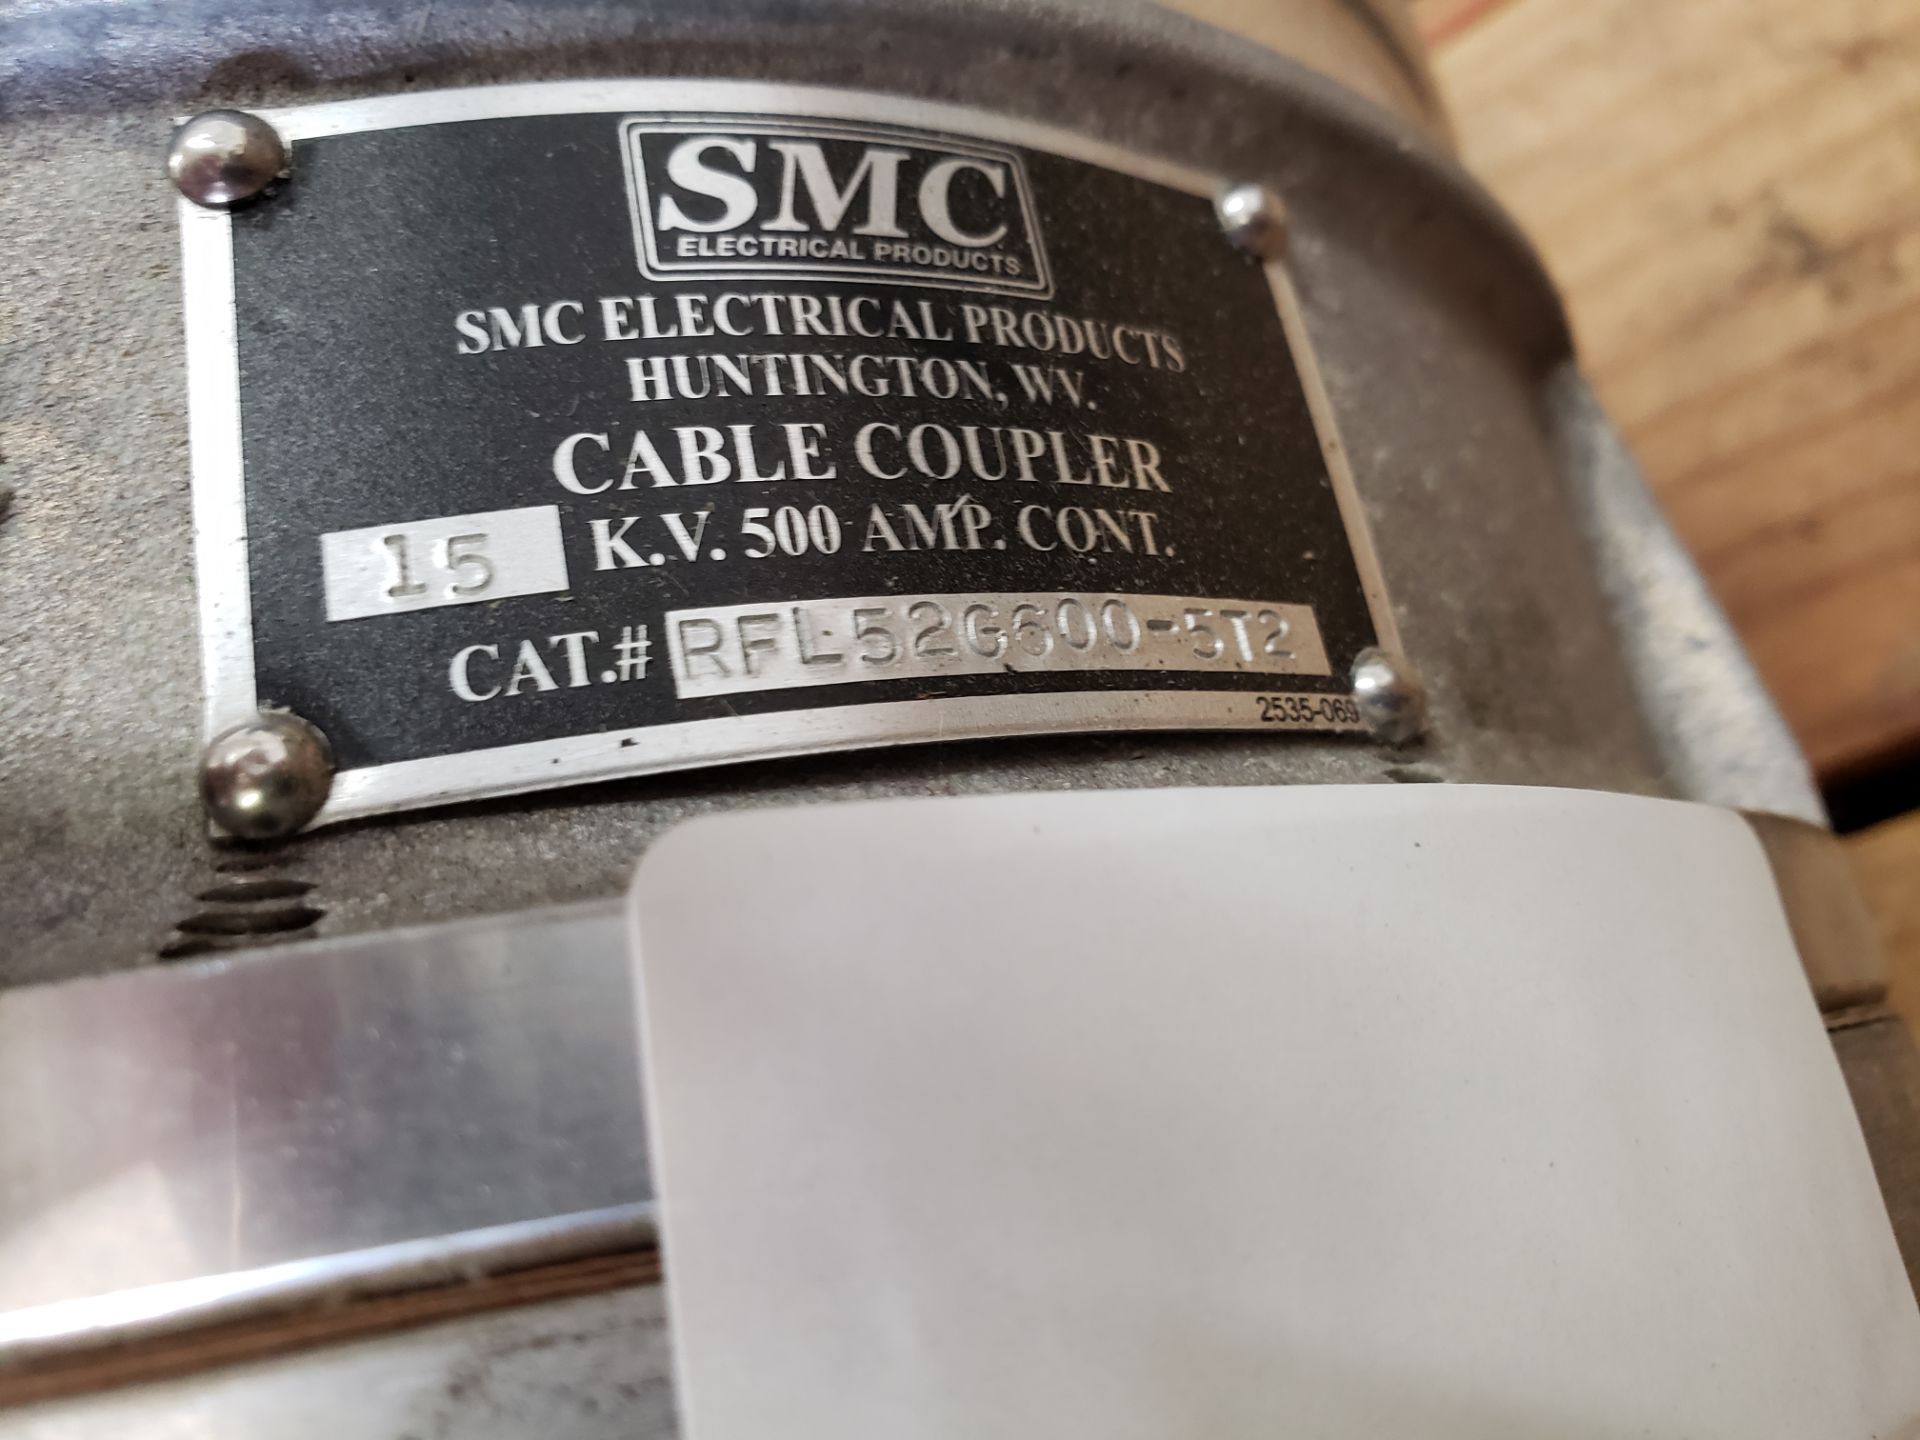 SMC ELECTRICAL PRODUCTS CABLE COUPLER 15KV. 500 AMP. CONT. CAT#RFL52G600-5T2 (LOCATED AT 432 COUNCIL - Bild 2 aus 2